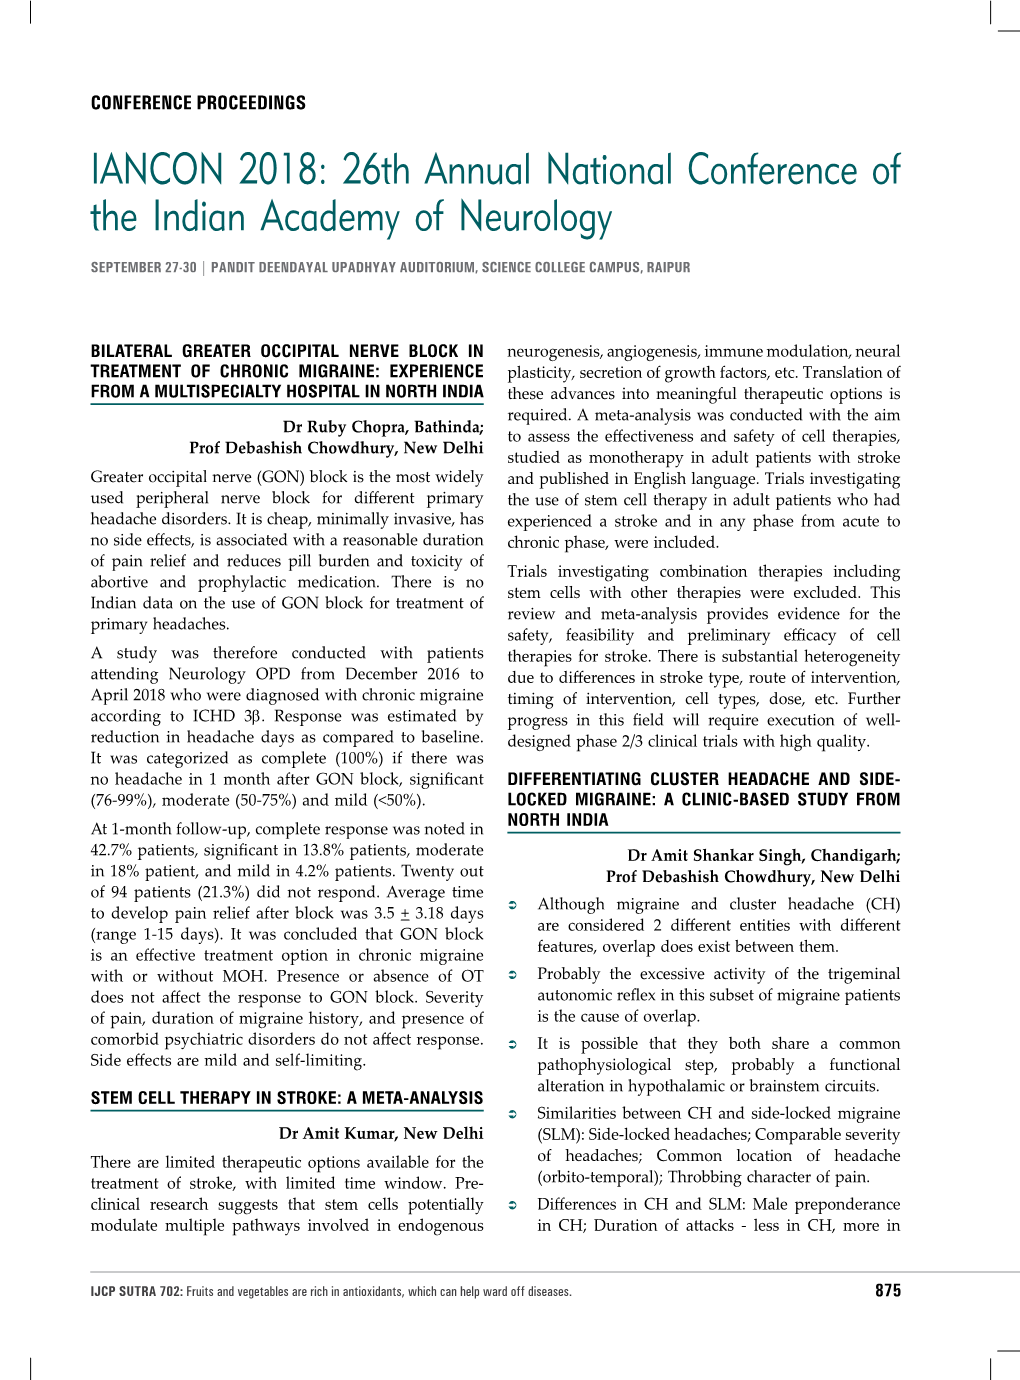 26Th Annual National Conference of the Indian Academy of Neurology